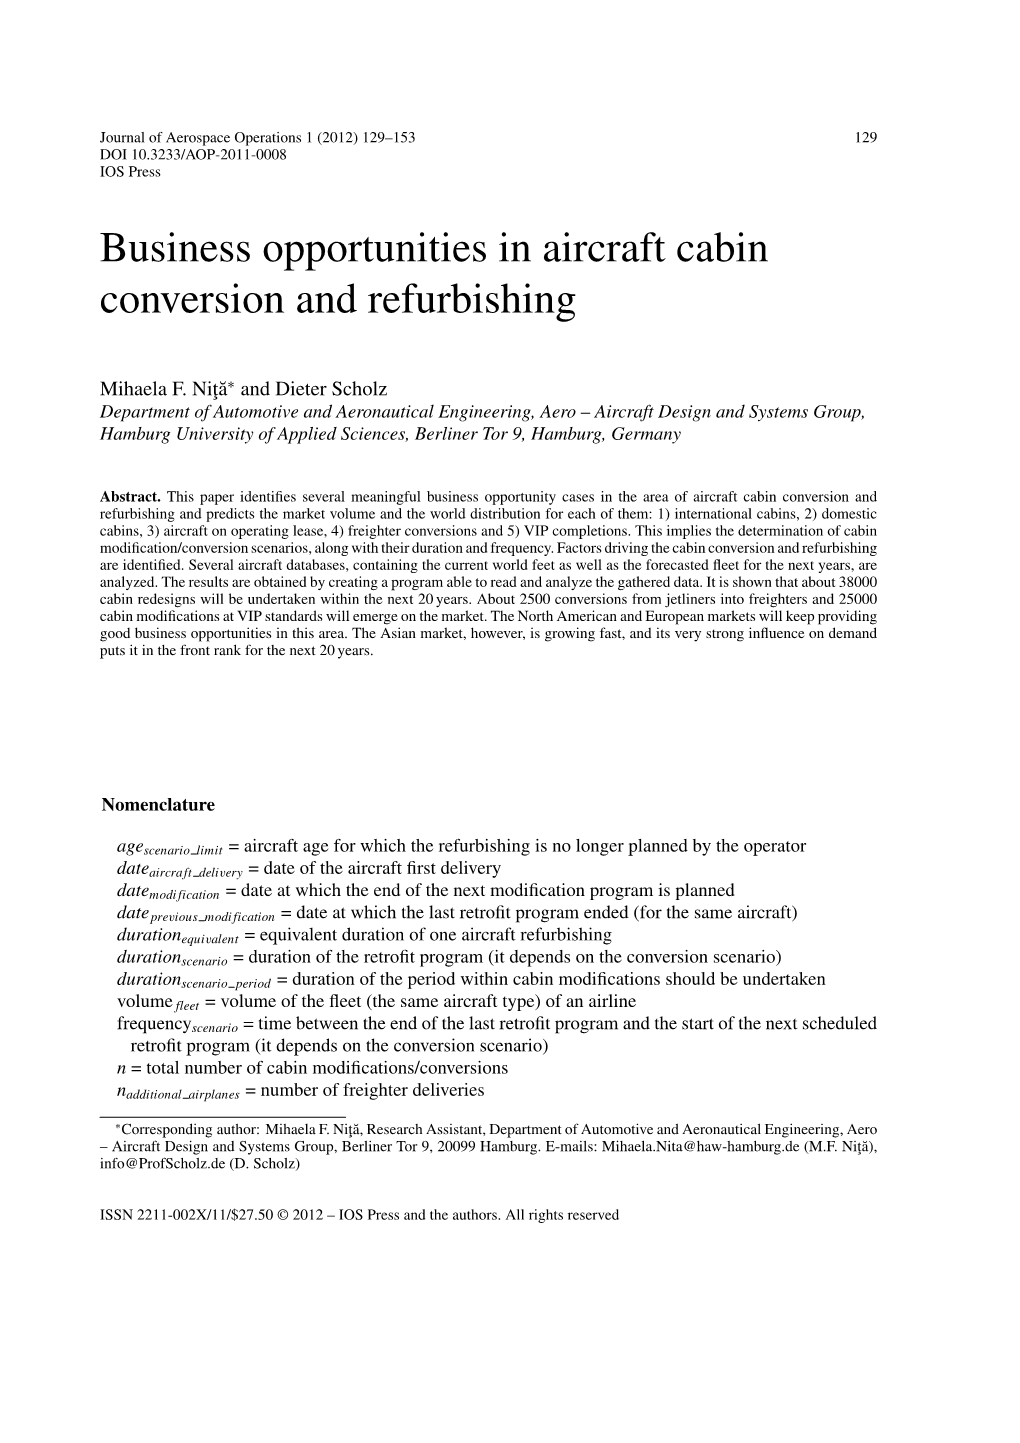 Business Opportunities in Aircraft Cabin Conversion and Refurbishing